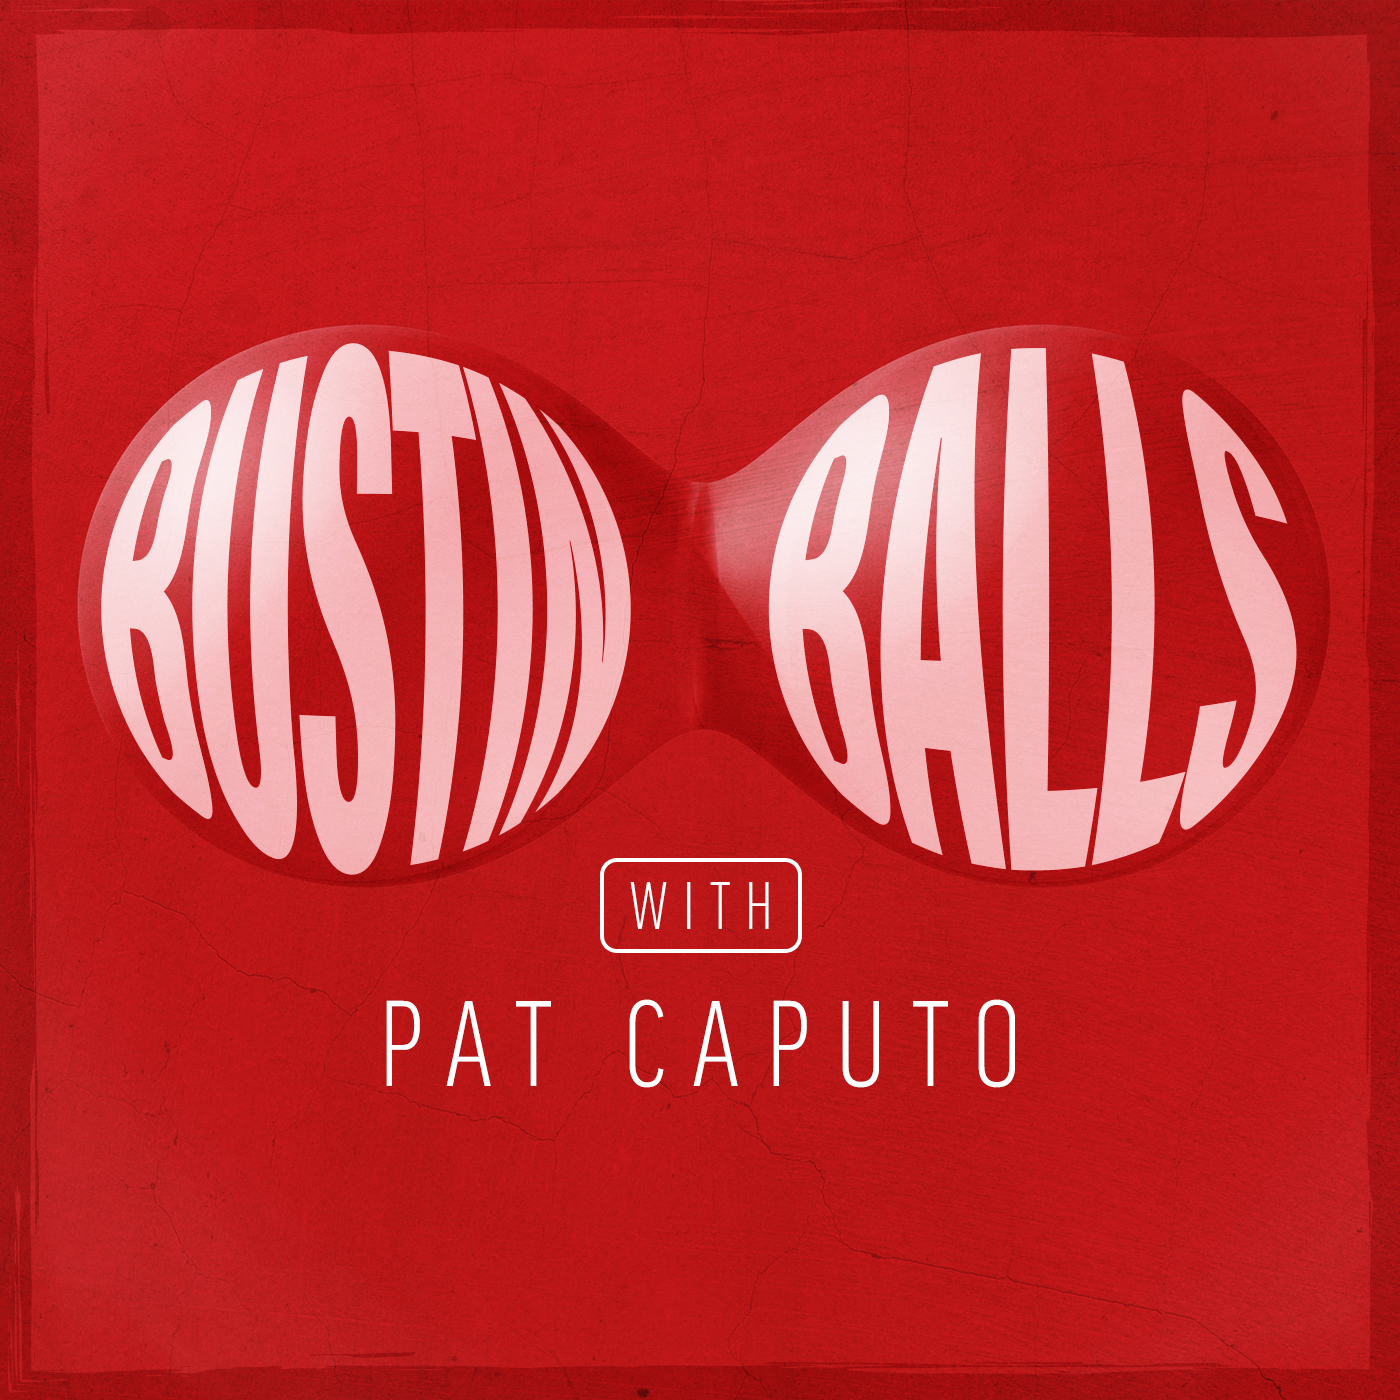 Bustin Balls with Pat Caputo - Scott Harris does have a foundation for success